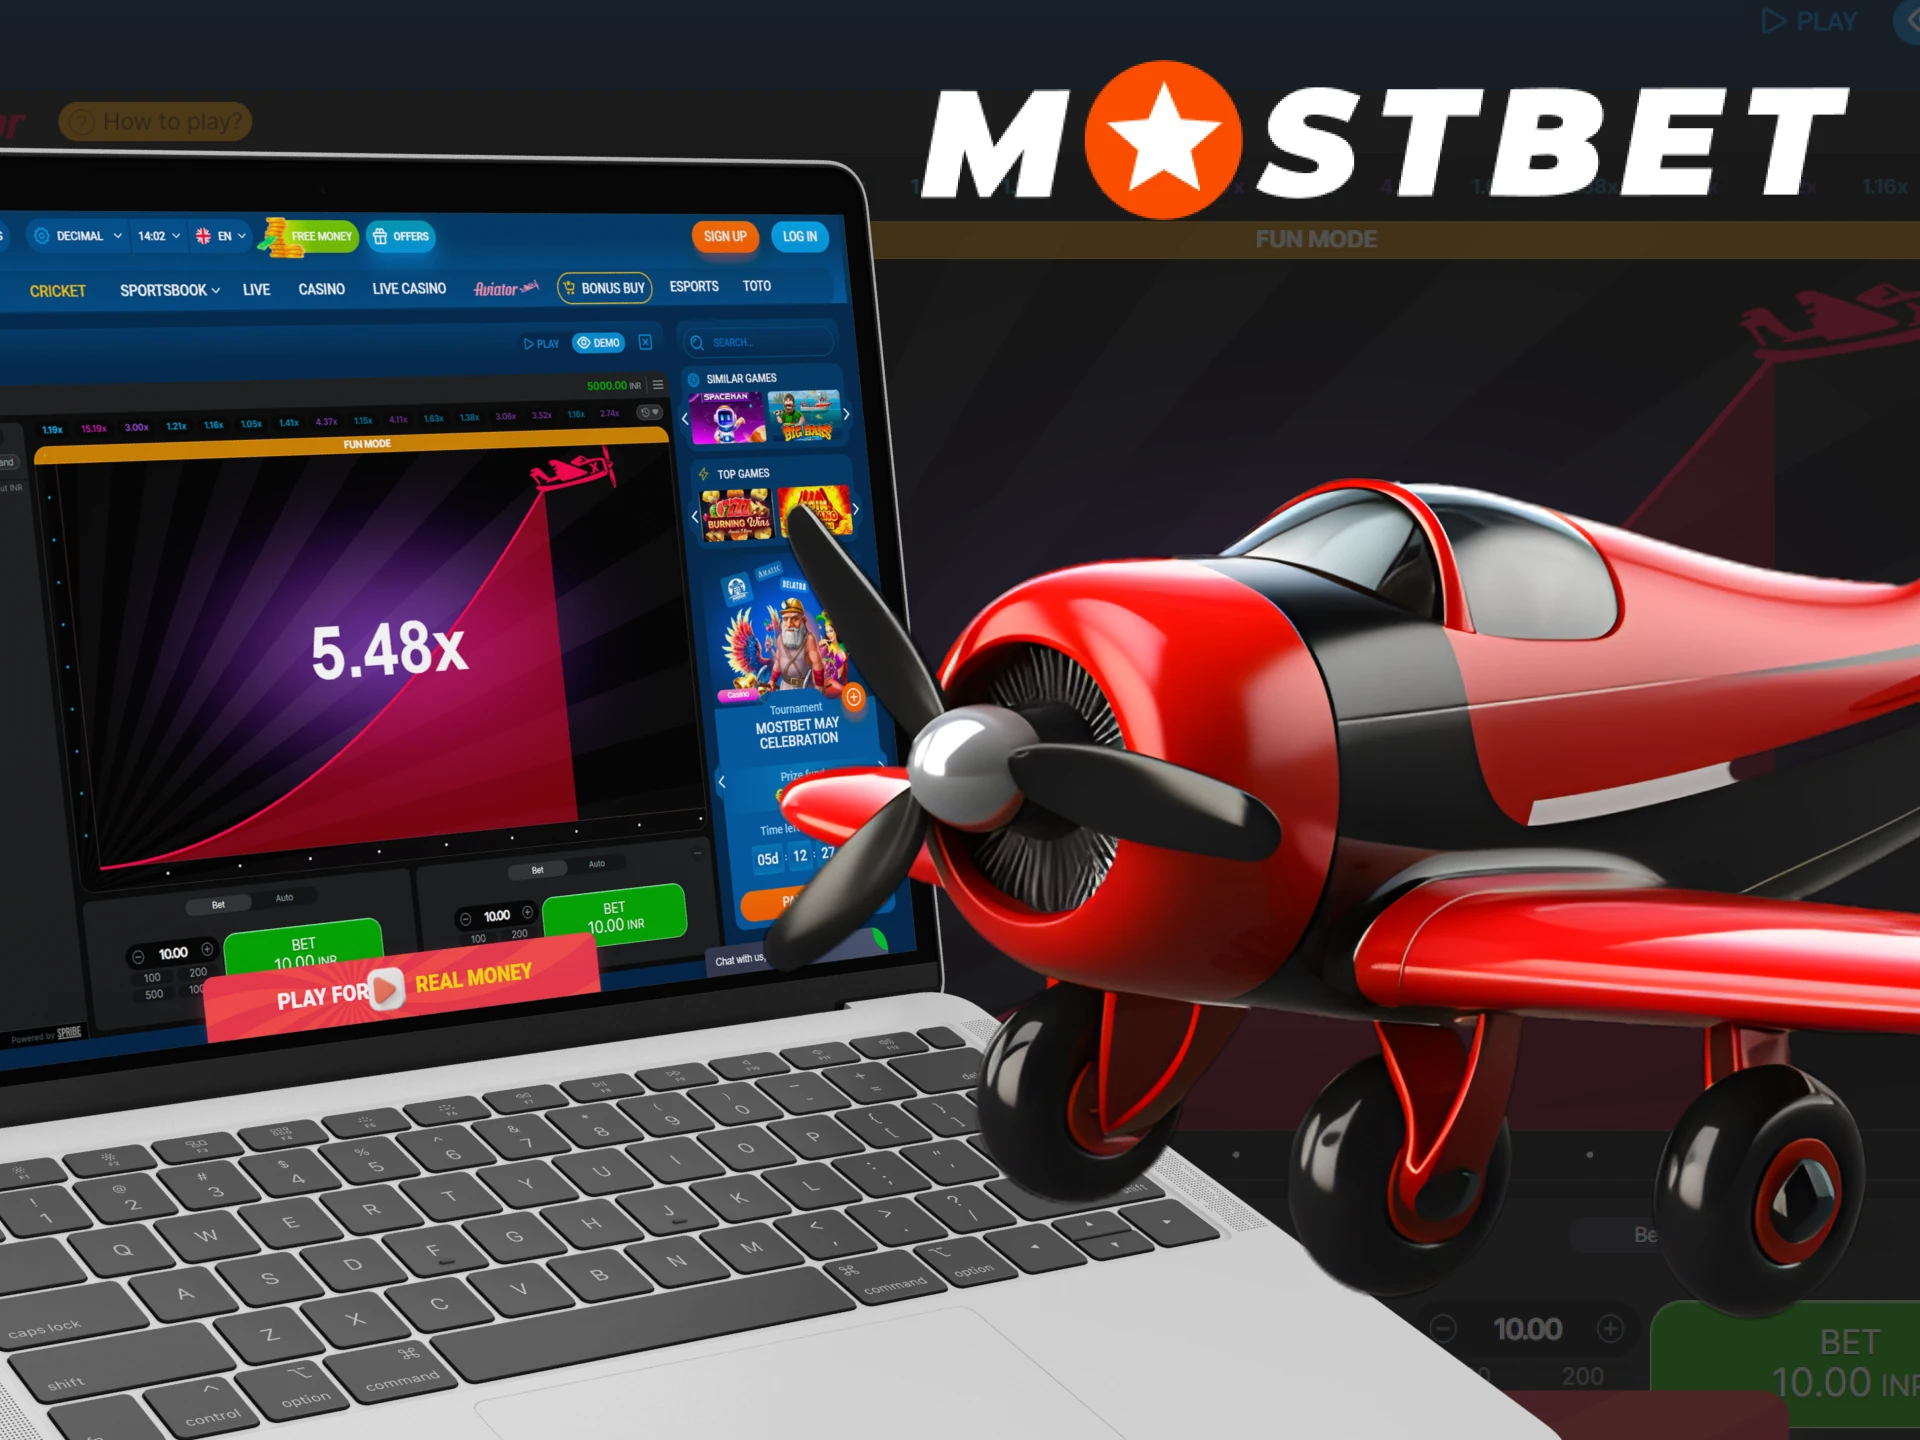 If you like the Aviator game, you can play it at Mostbet.